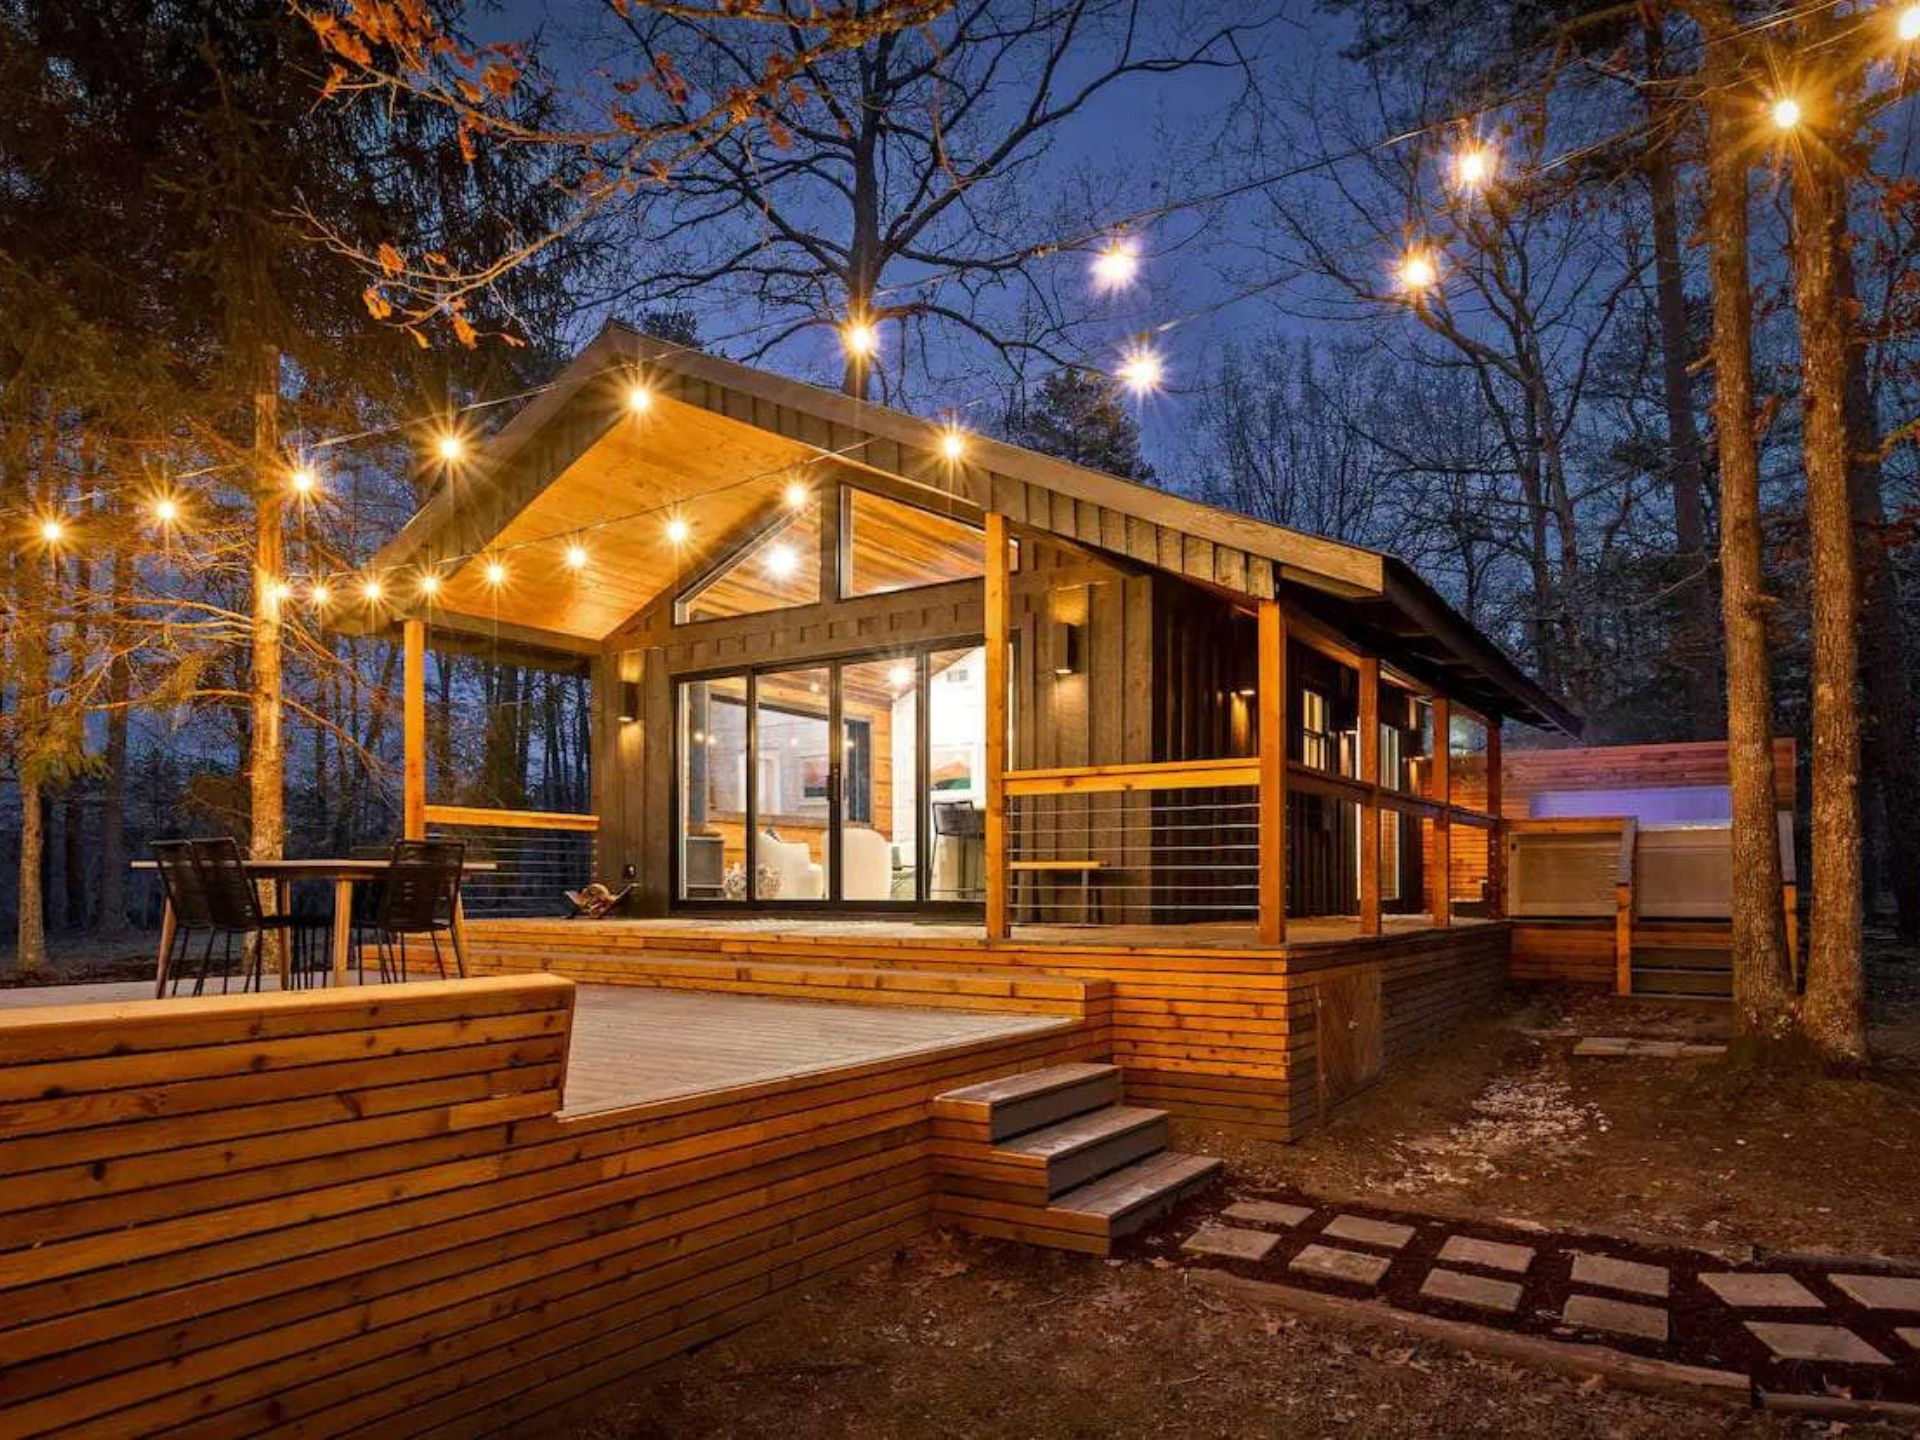 Beautiful cabin in the dark with a light balls